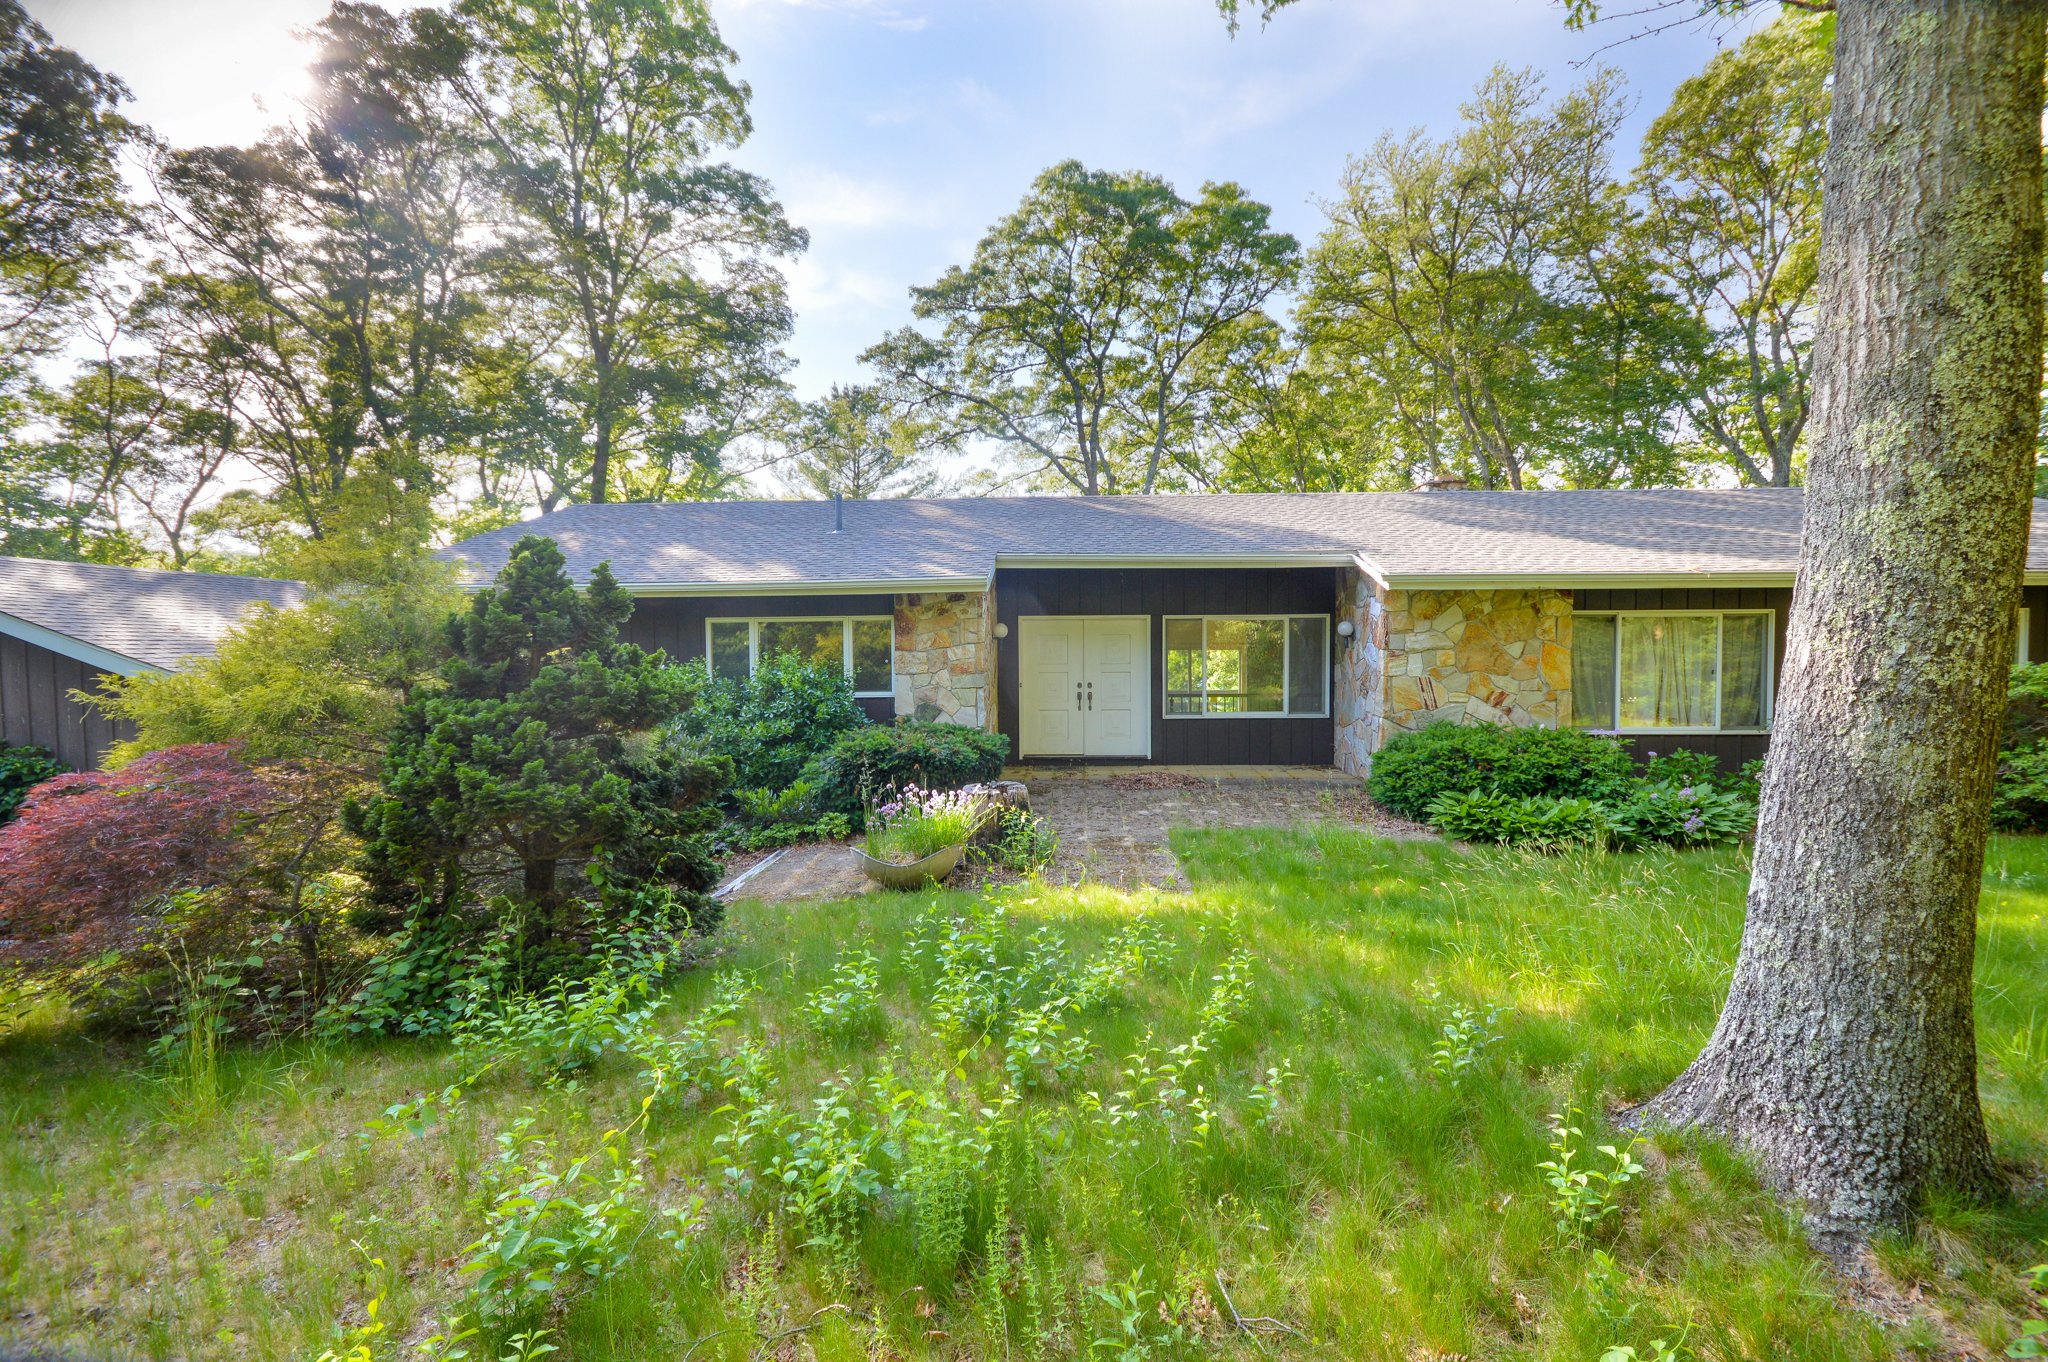 56 Pattee Rd, Falmouth, MA 02536, US